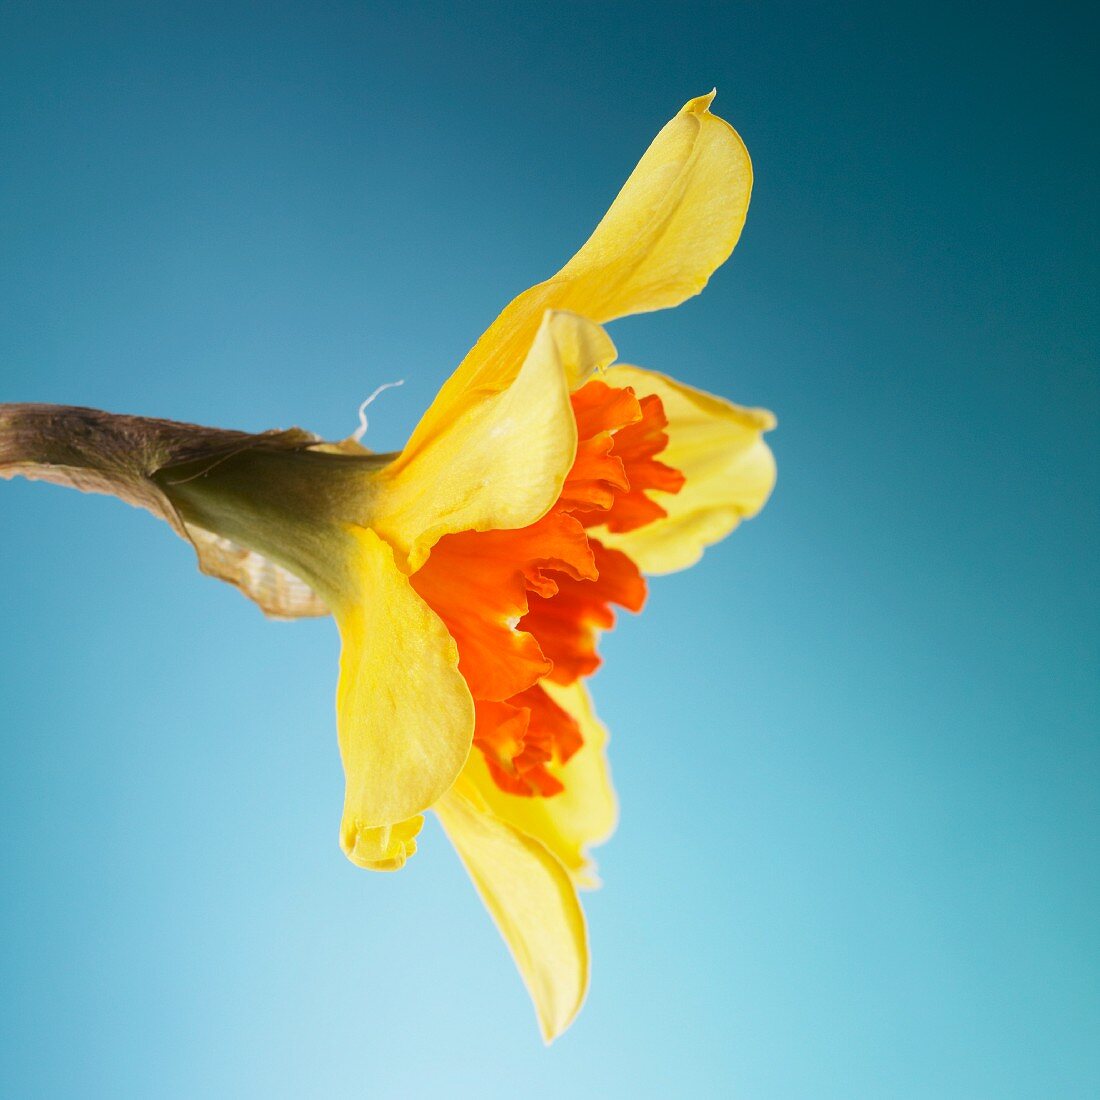 A yellow narcissus against a blue background